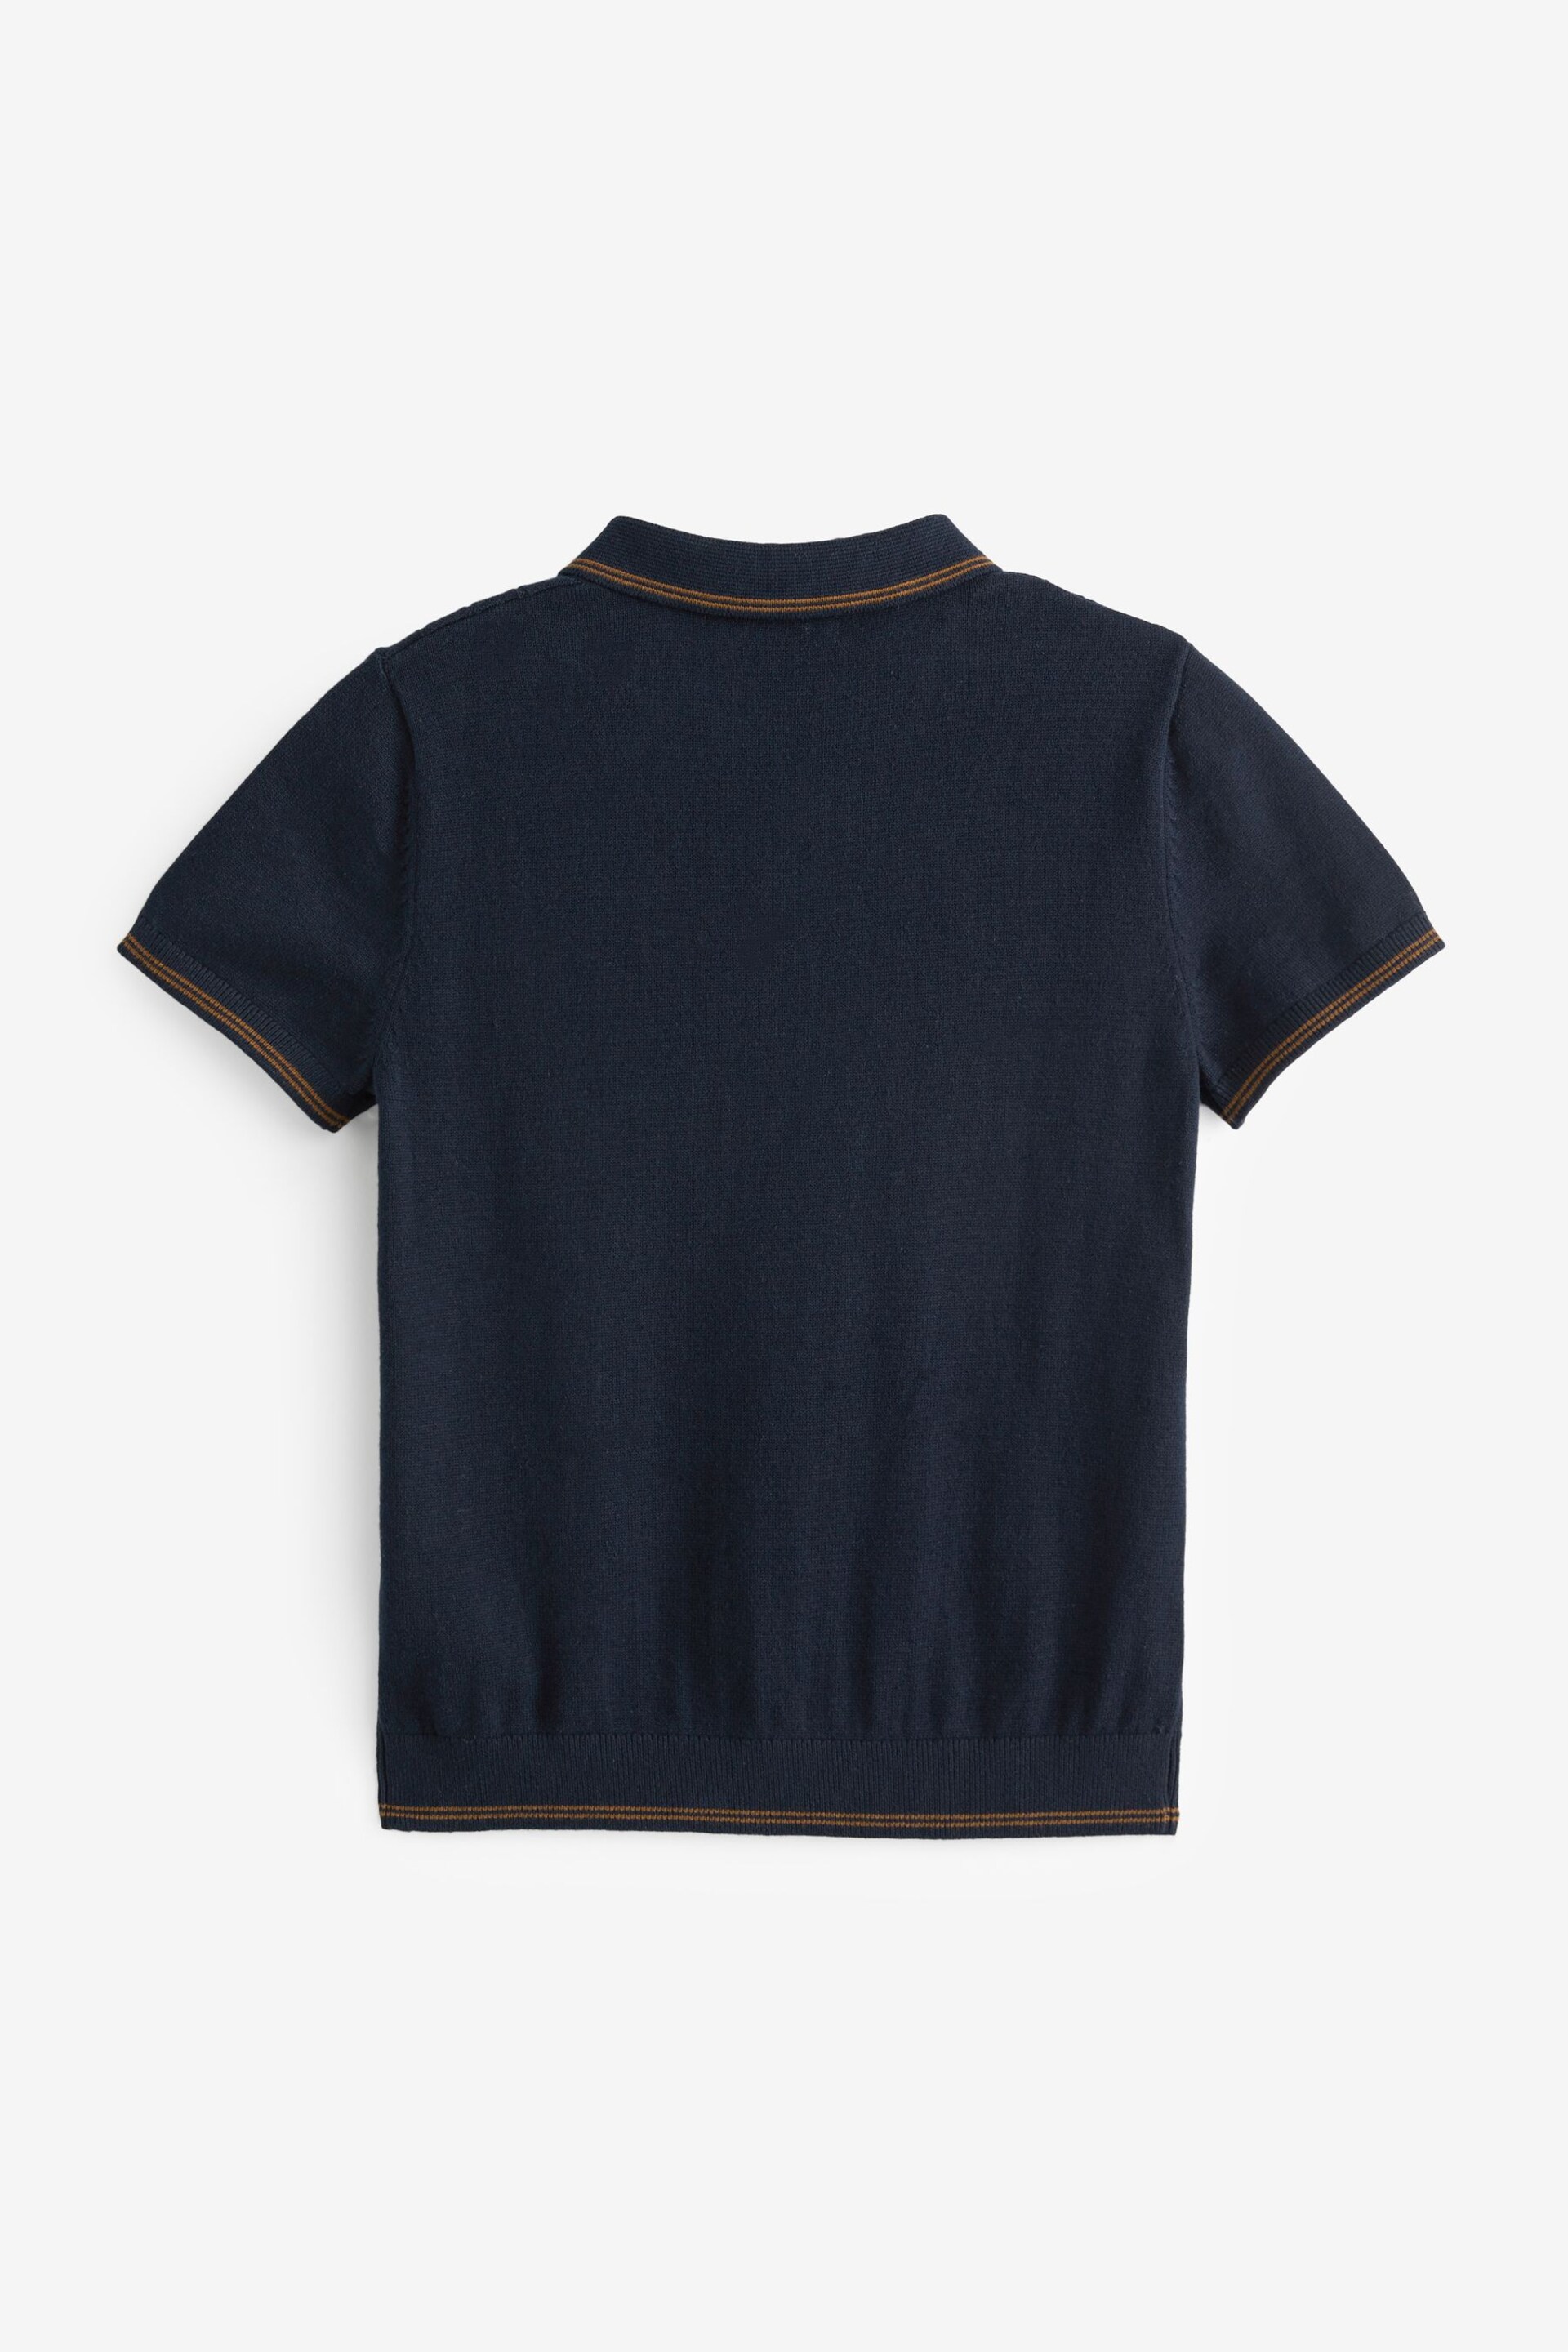 Navy Polo Short Sleeve Trophy Neck Jumper (3-16yrs) - Image 4 of 5